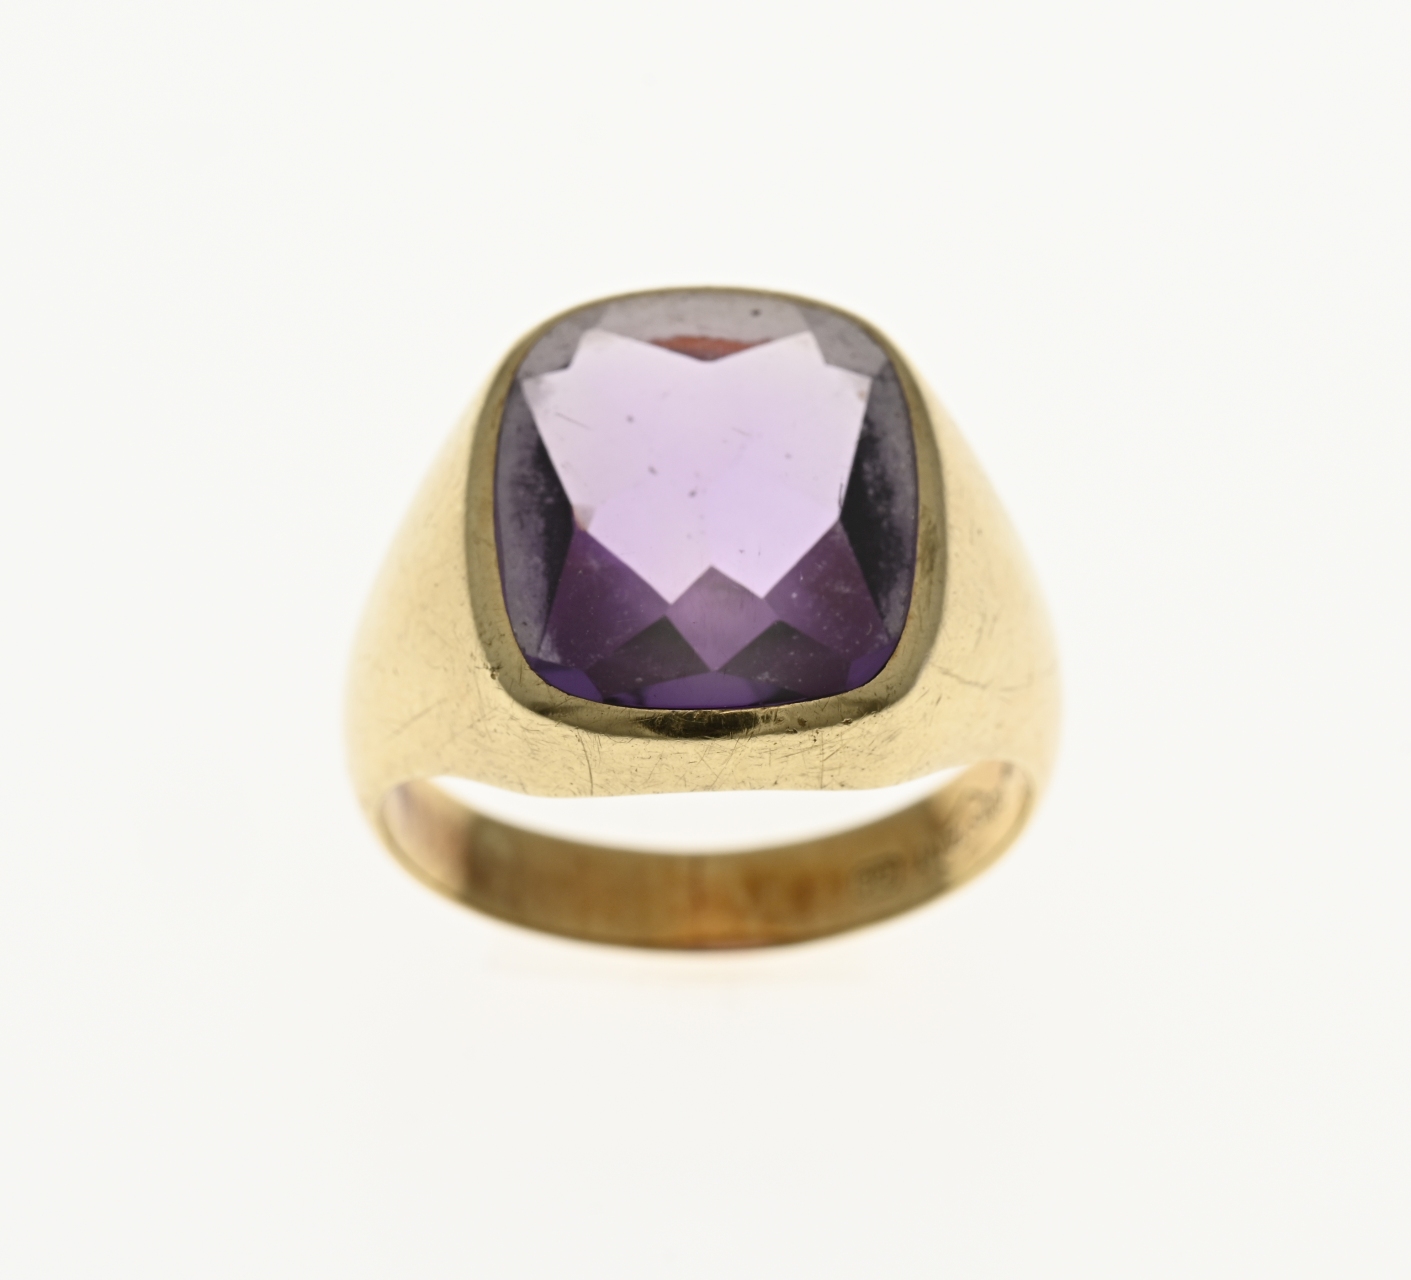 Gold men's ring with amethyst